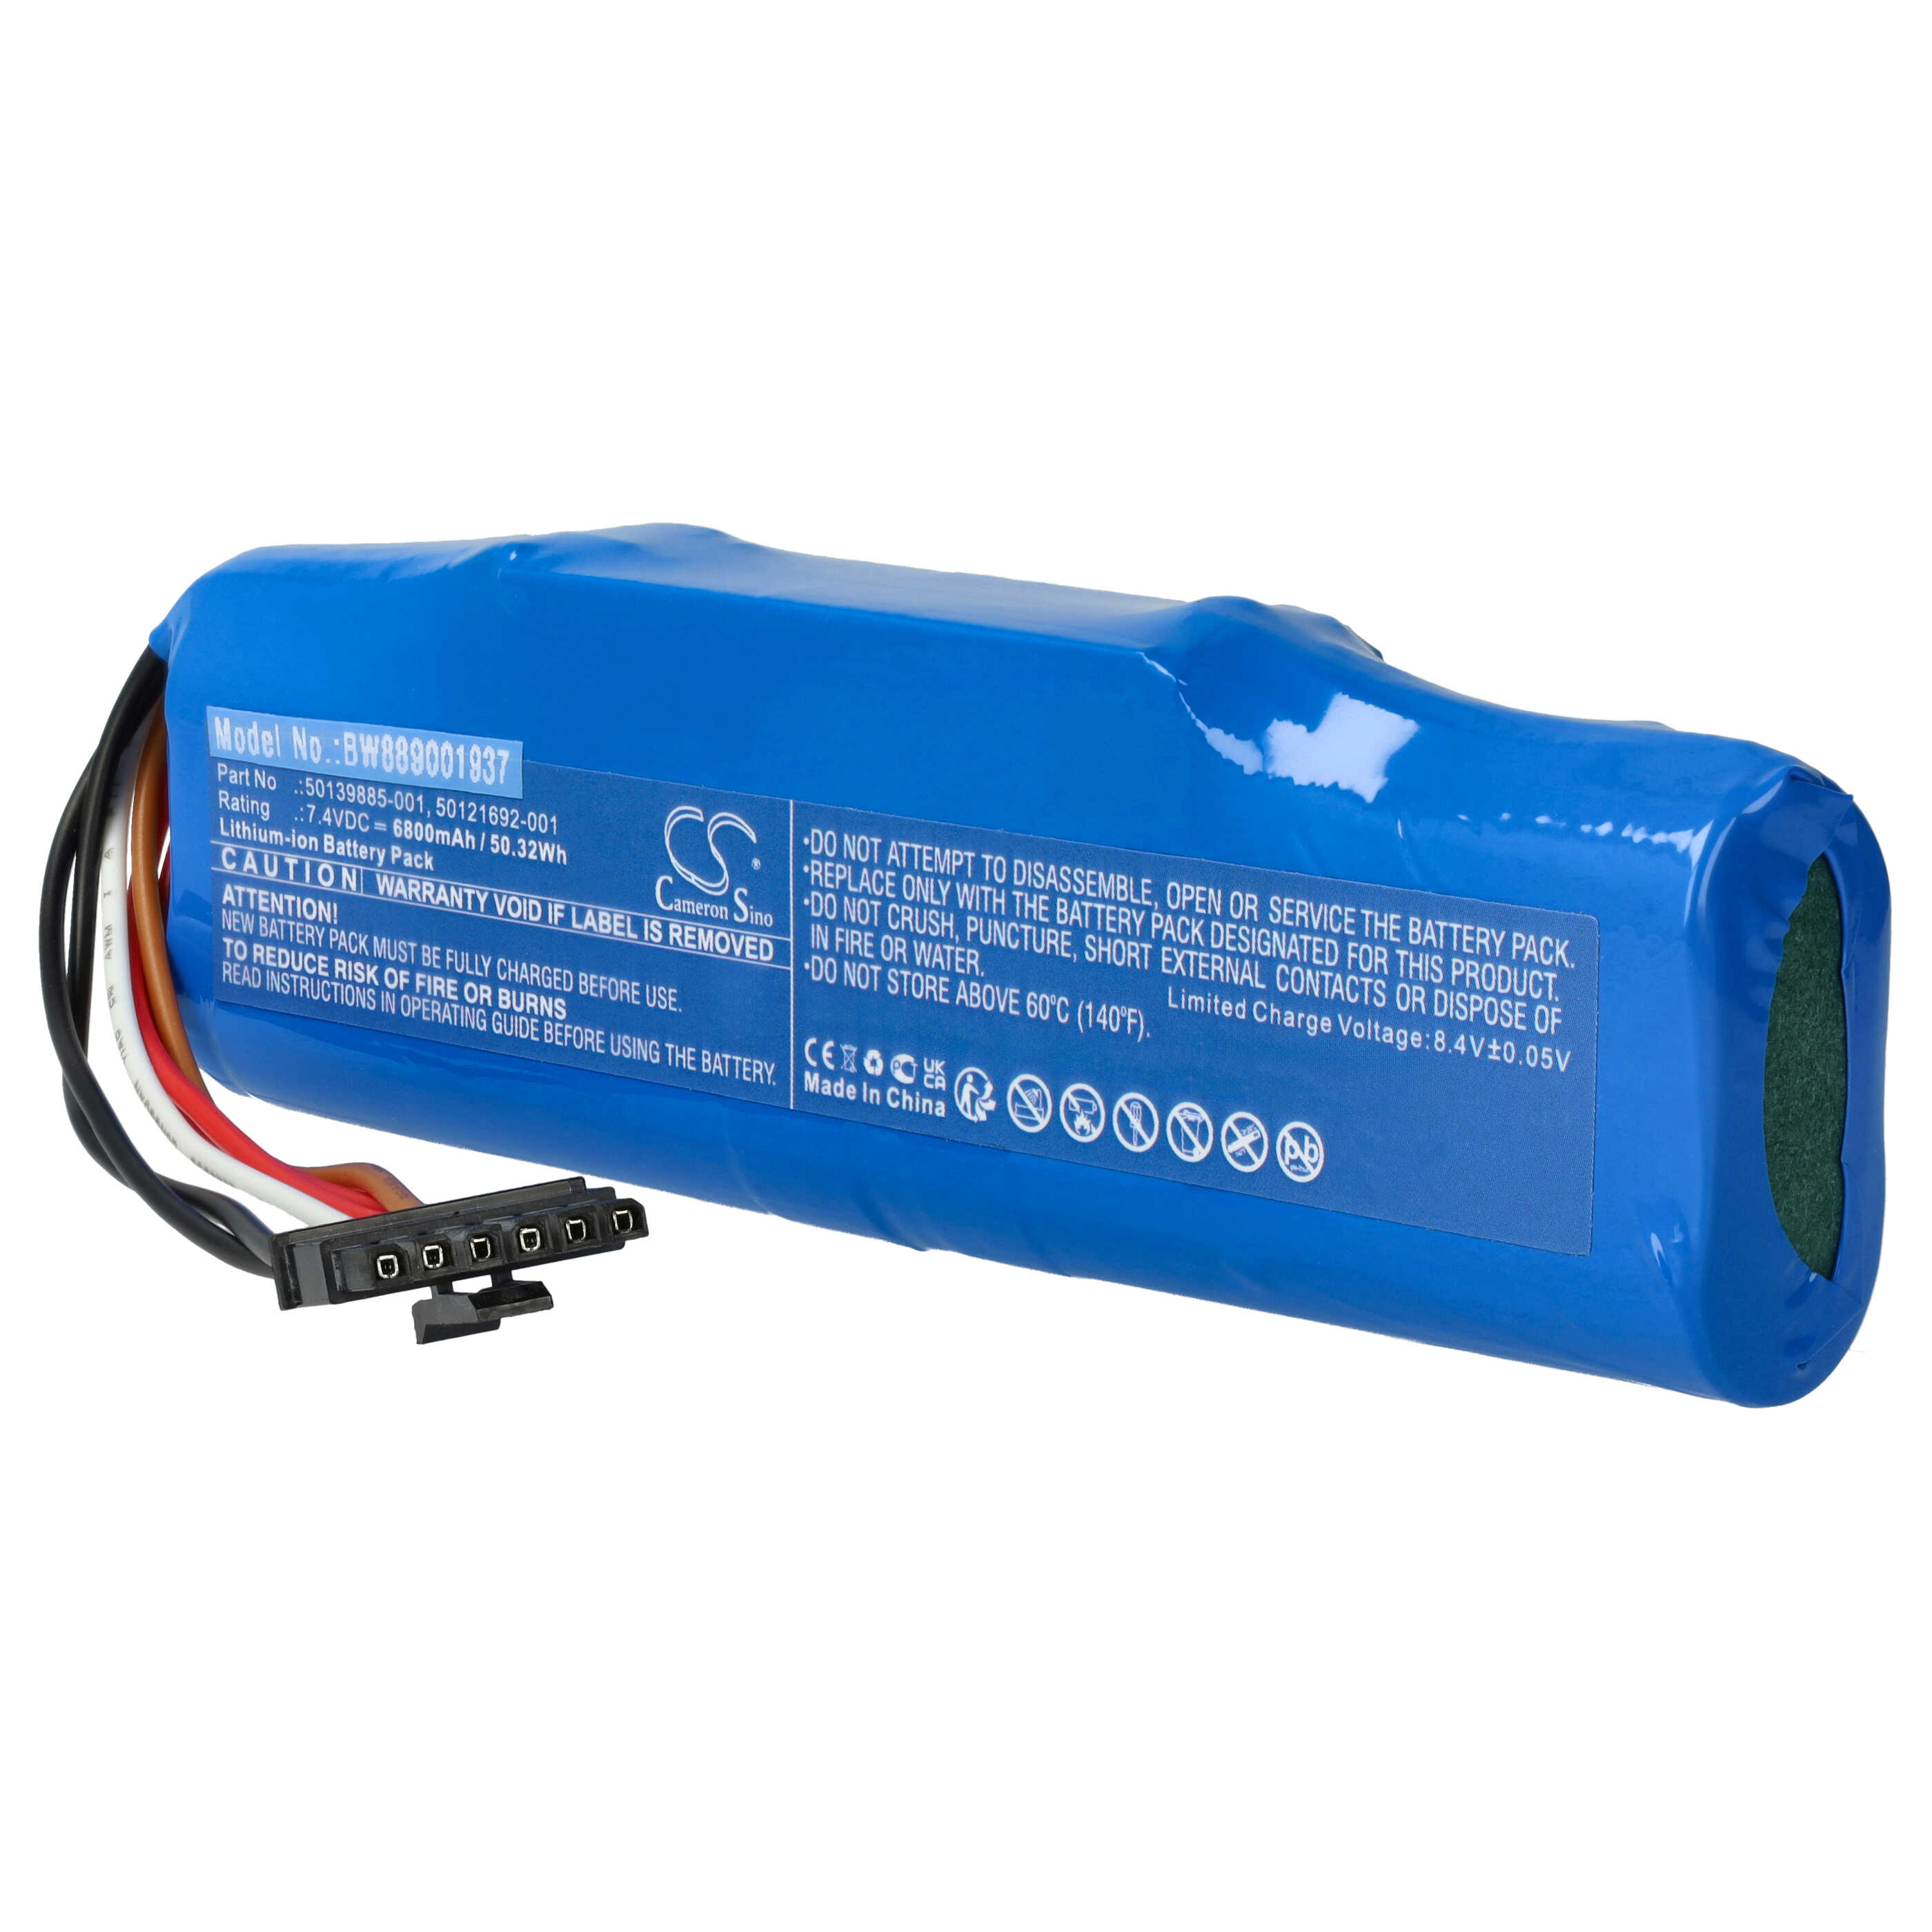 Mobile PC Battery Replacement for Honeywell 50139885-001, L3-52301624A-R, 50121692-001 - 6800mAh 7.4V Li-Ion